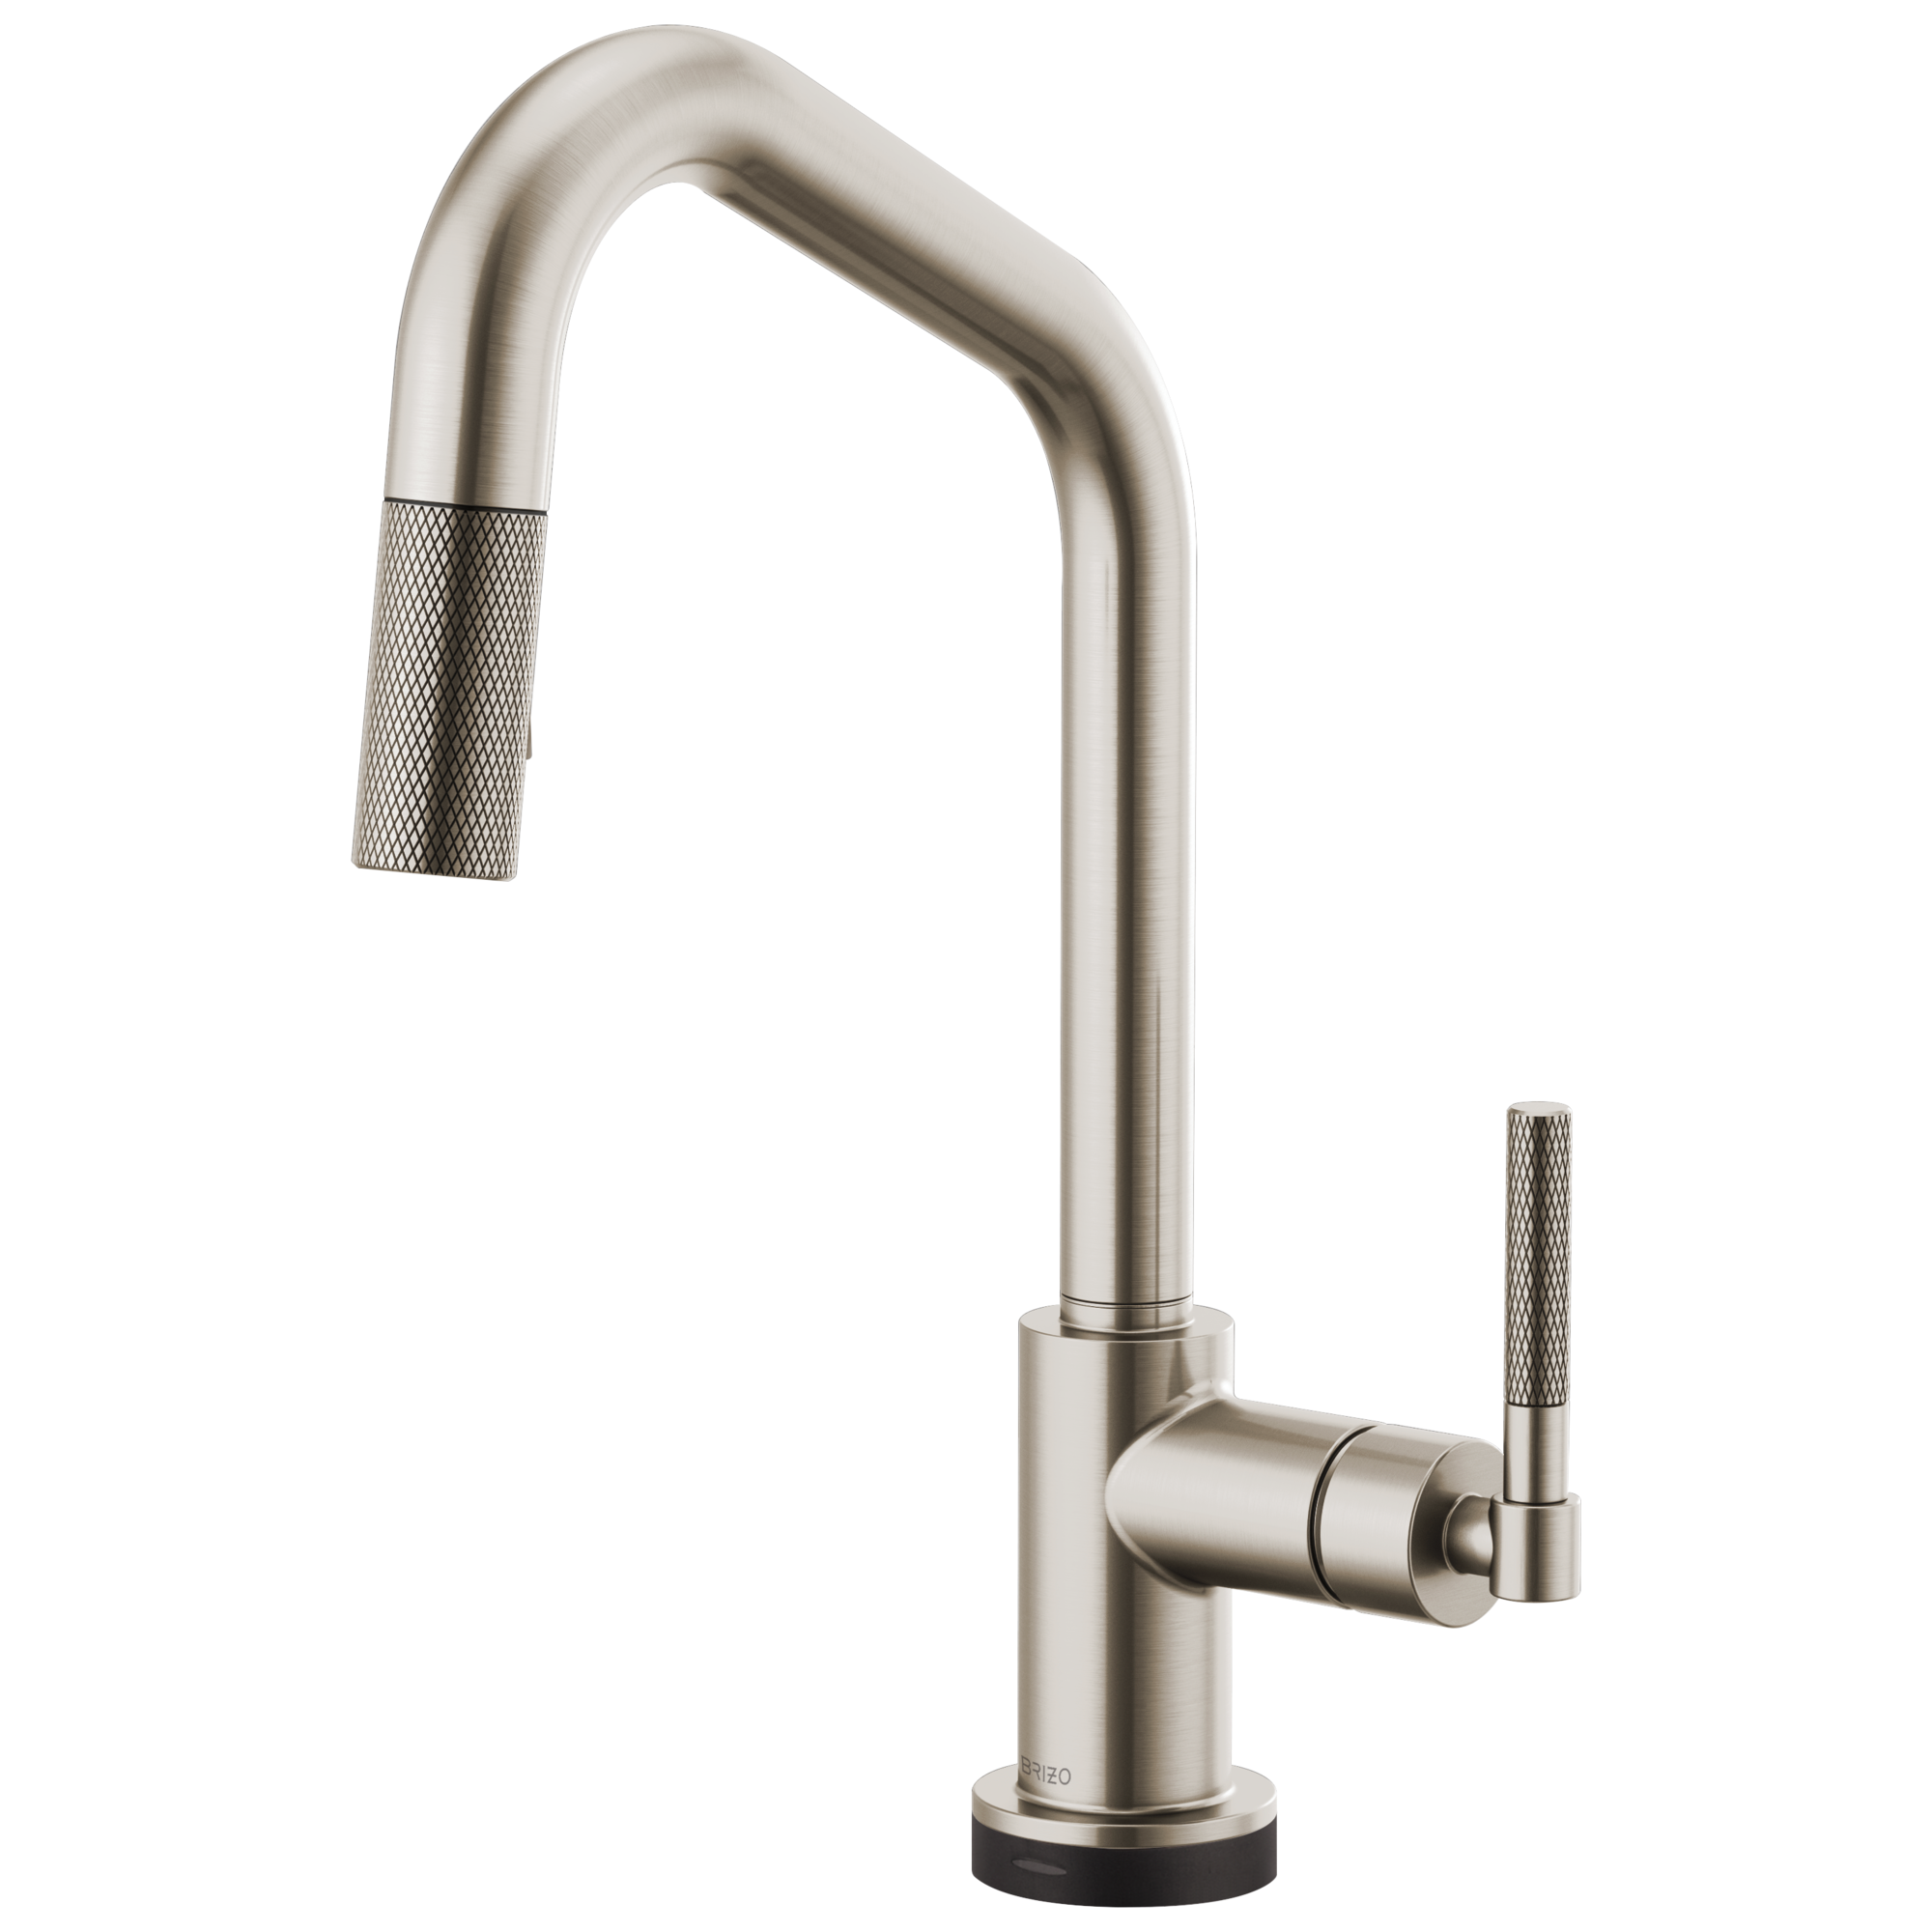 Brizo Litze Smart Touch Pull-Down Kitchen Faucet with Angled Spout and Knurled Handle